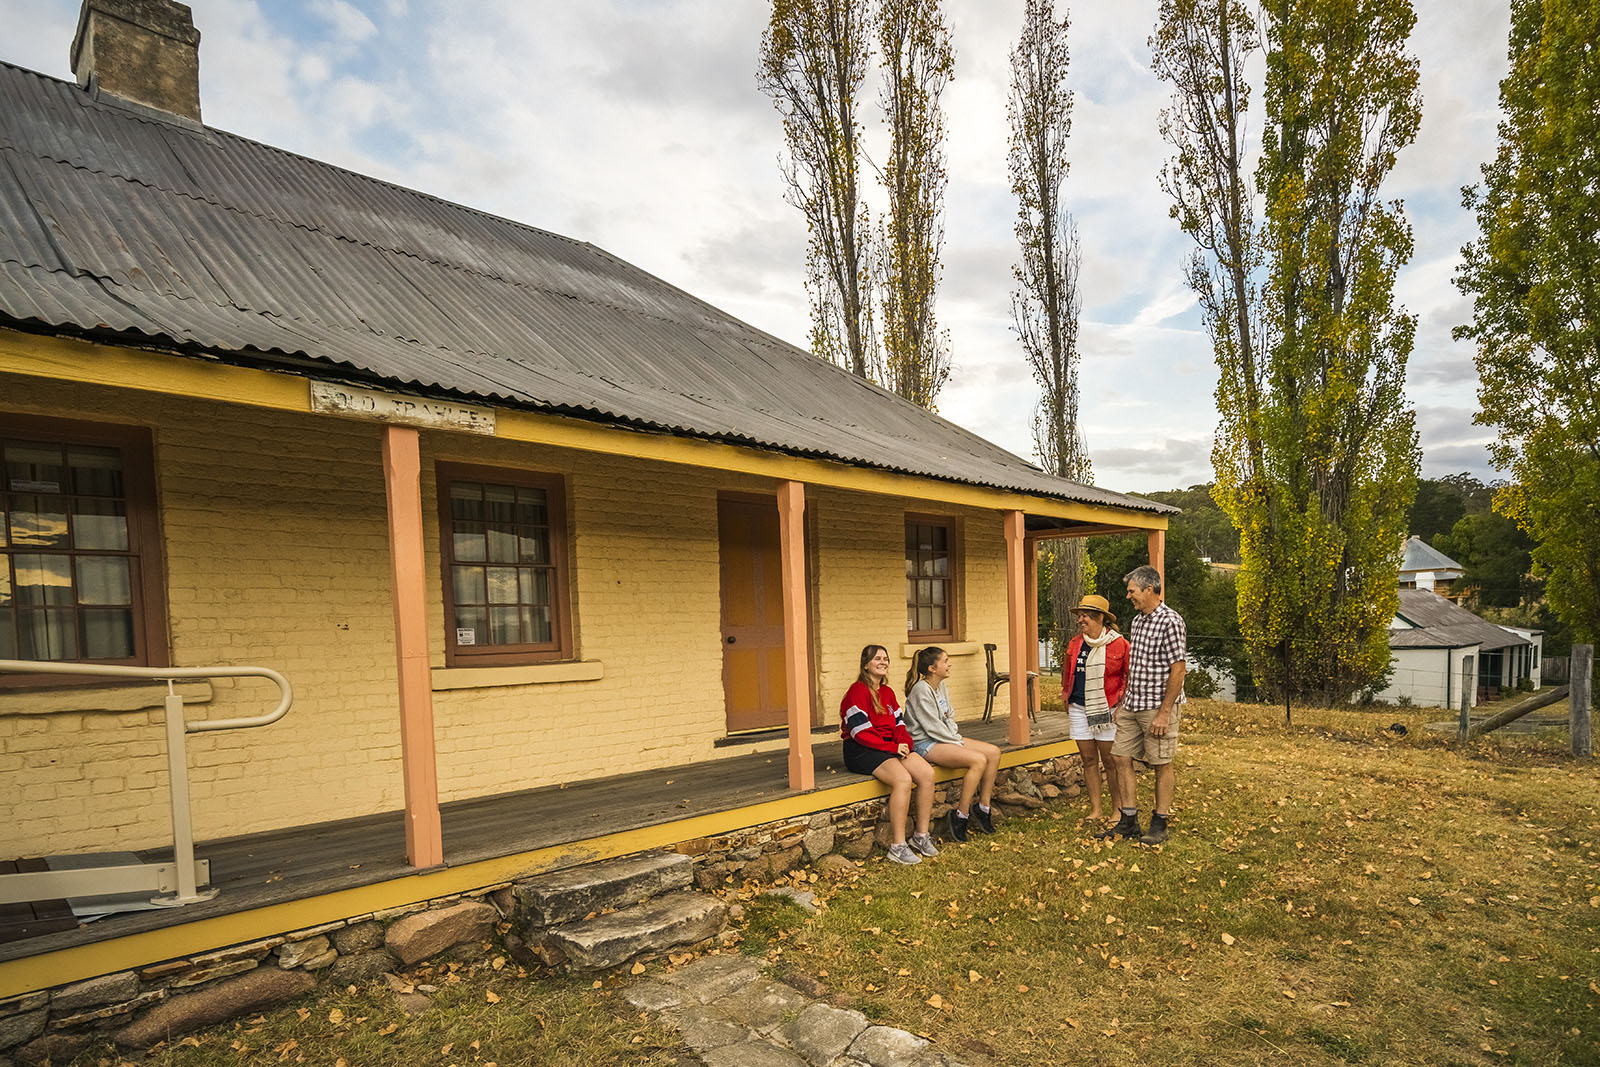 A family sitting outside Old Trahlee, Hartley Historic Site. Photo credit: John Spencer/DPIE